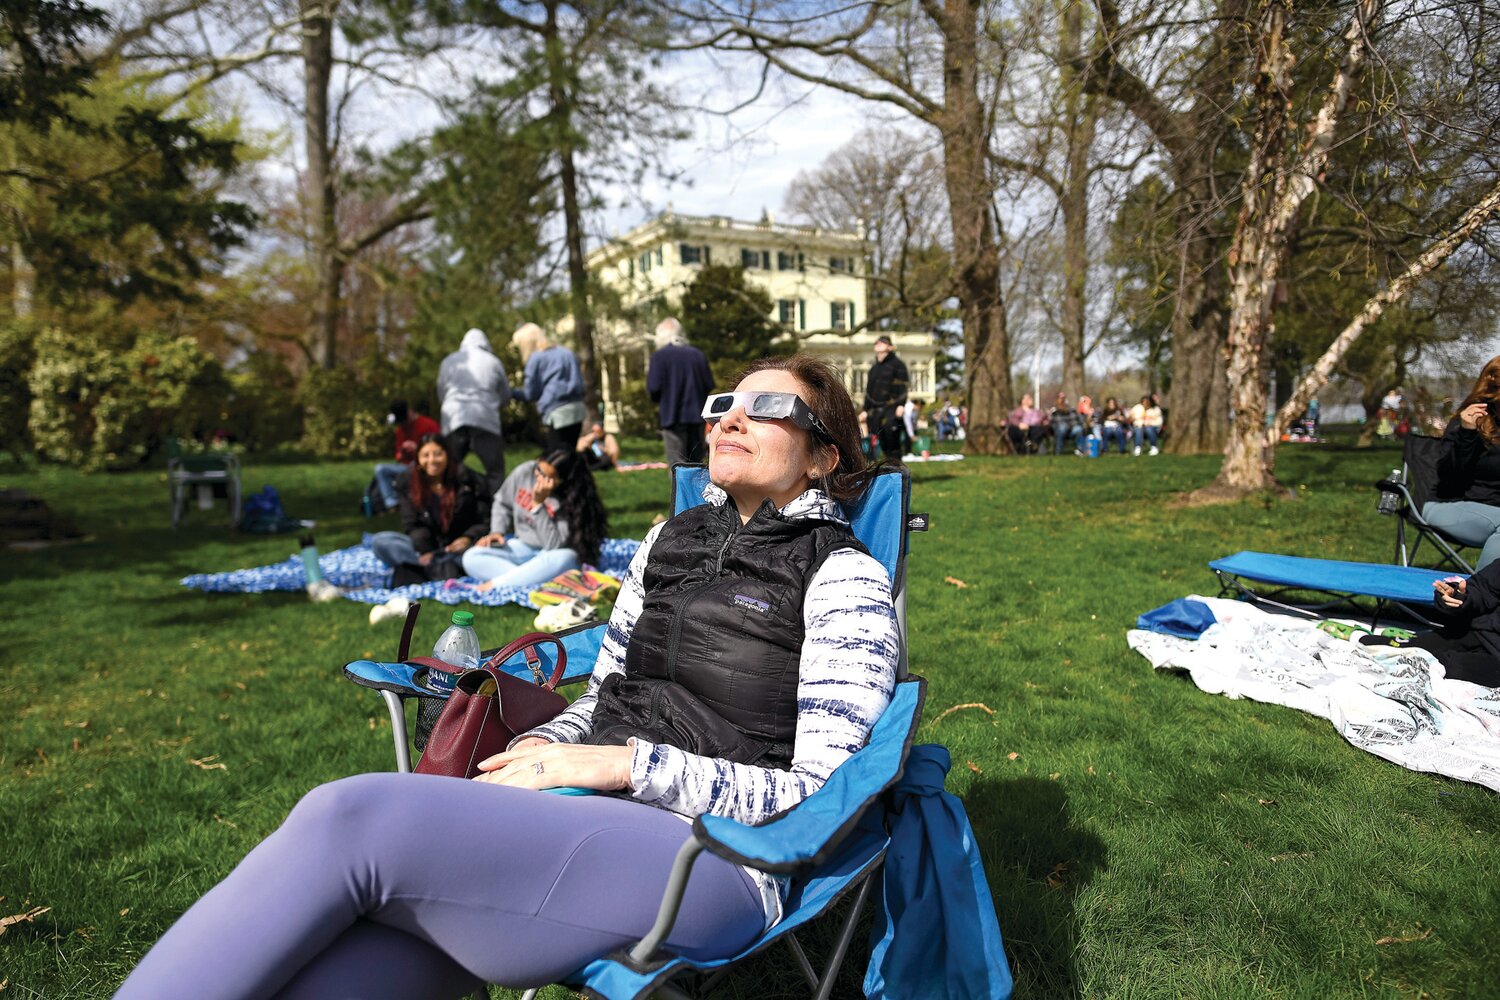 Cecilia Richardson, of Annapolis. Md., enjoys the eclipse through a brief peak in the clouds.